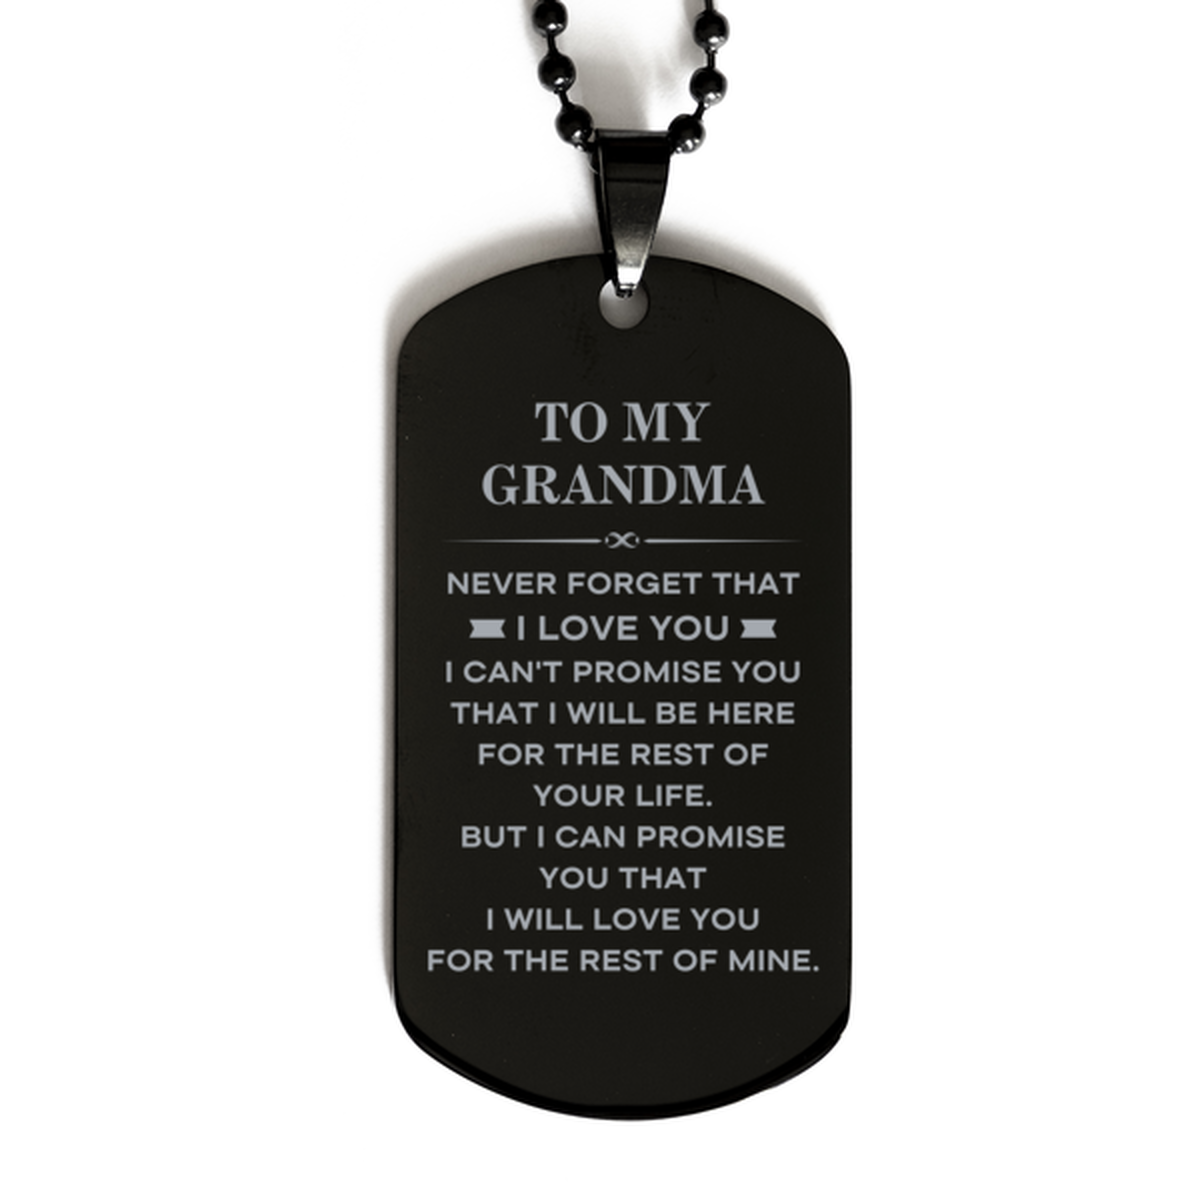 To My Grandma Gifts, I will love you for the rest of mine, Love Grandma Dog Tag Necklace, Birthday Christmas Unique Black Dog Tag For Grandma